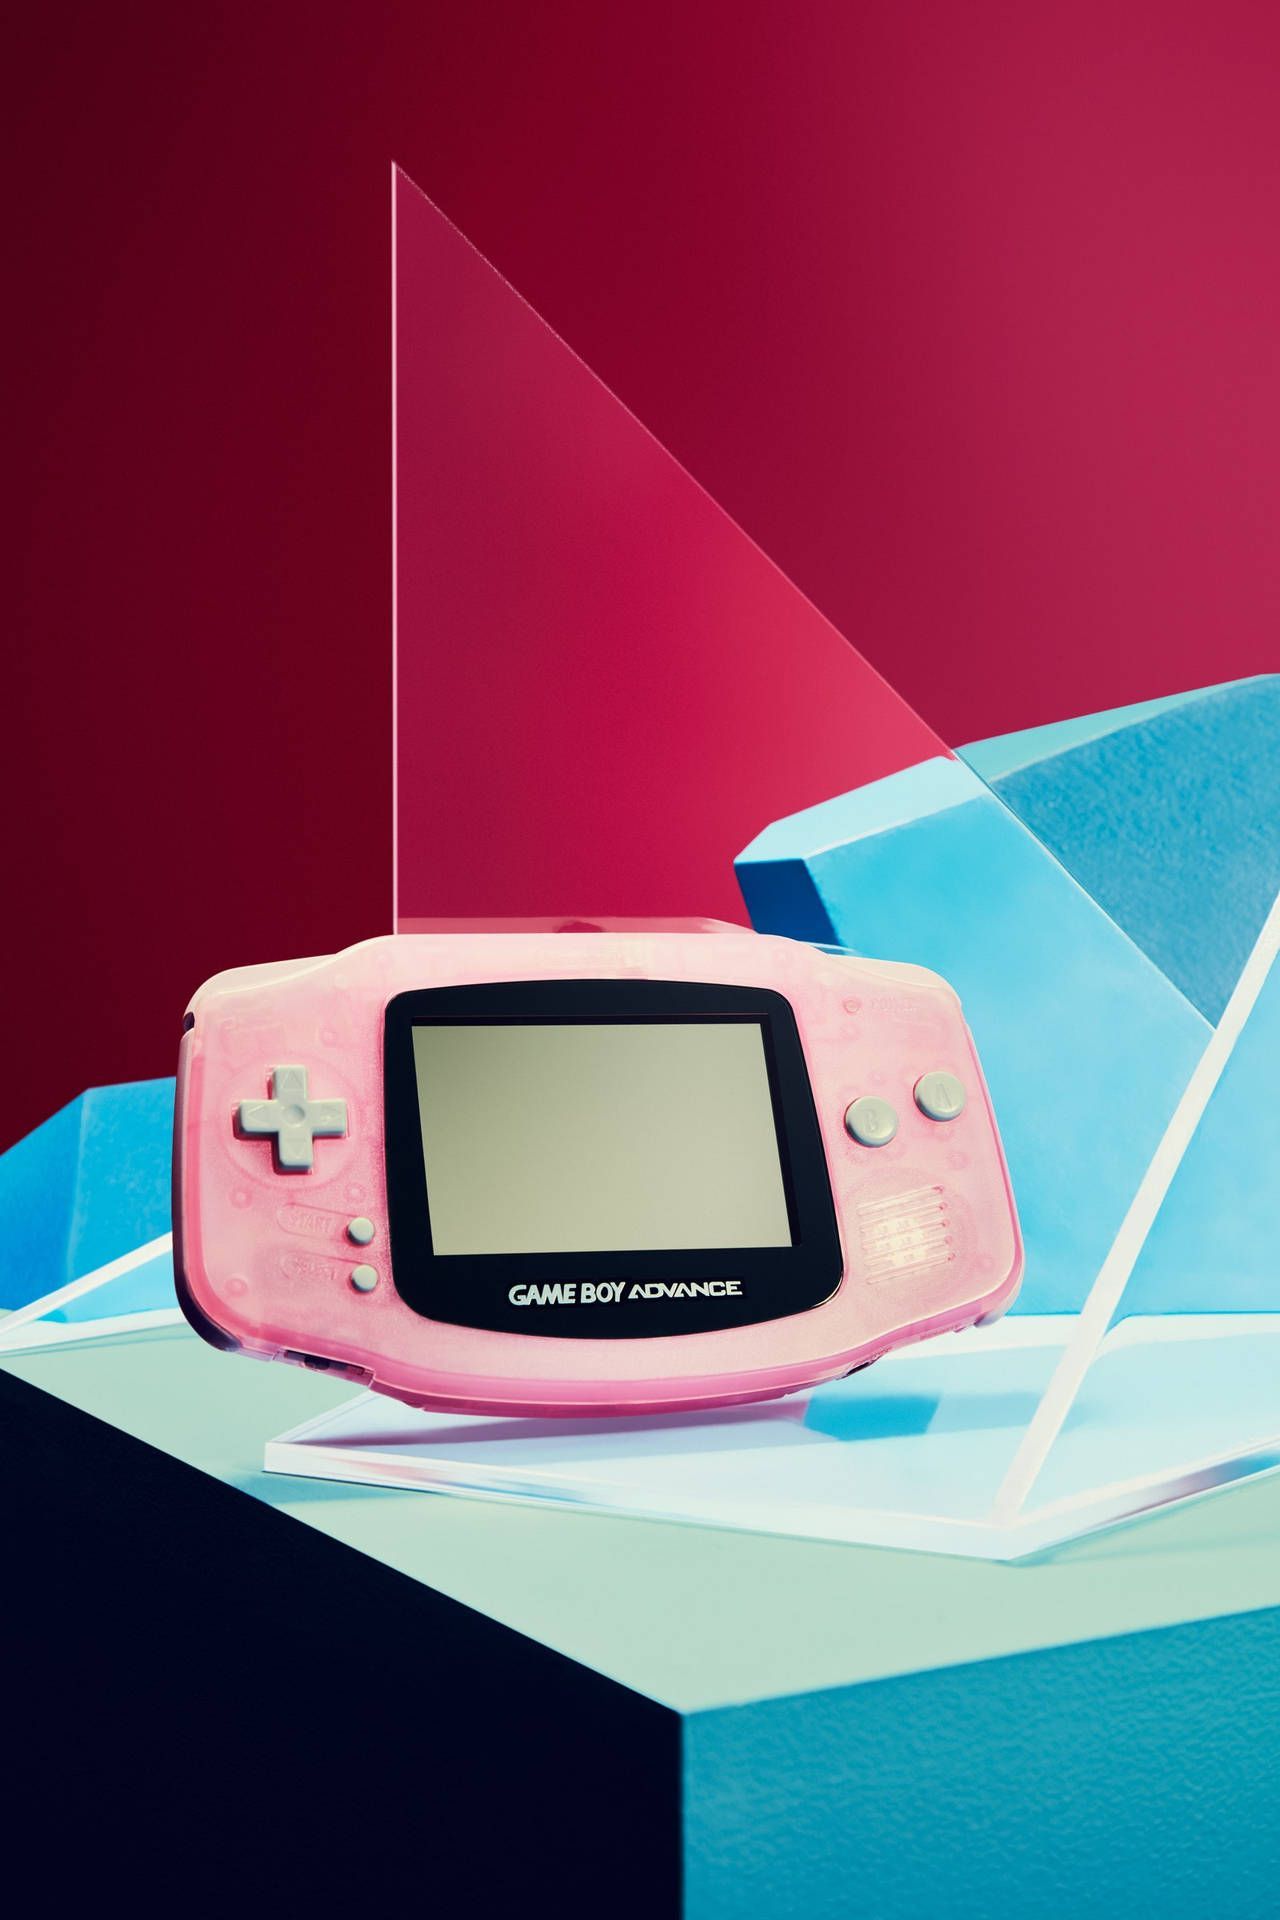 A pink Game Boy Advance sits on a blue and white surface against a red wall. - Game Boy